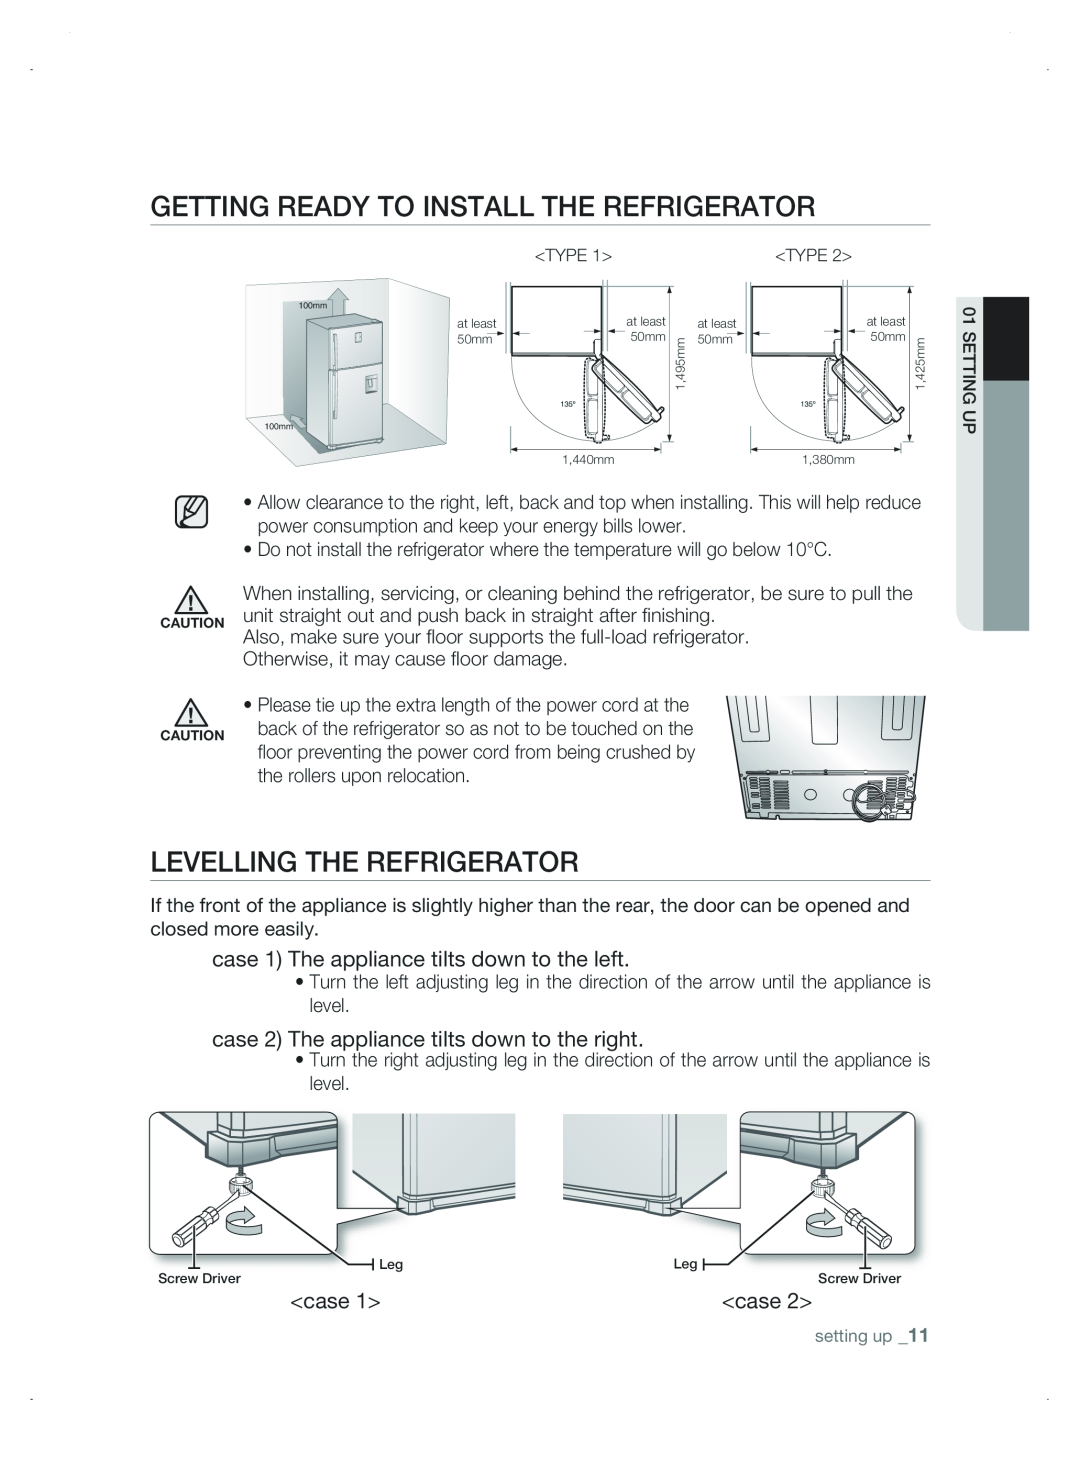 Samsung DA99-01906A user manual Levelling tHE rEfrigErator, case 1 The appliance tilts down to the left 